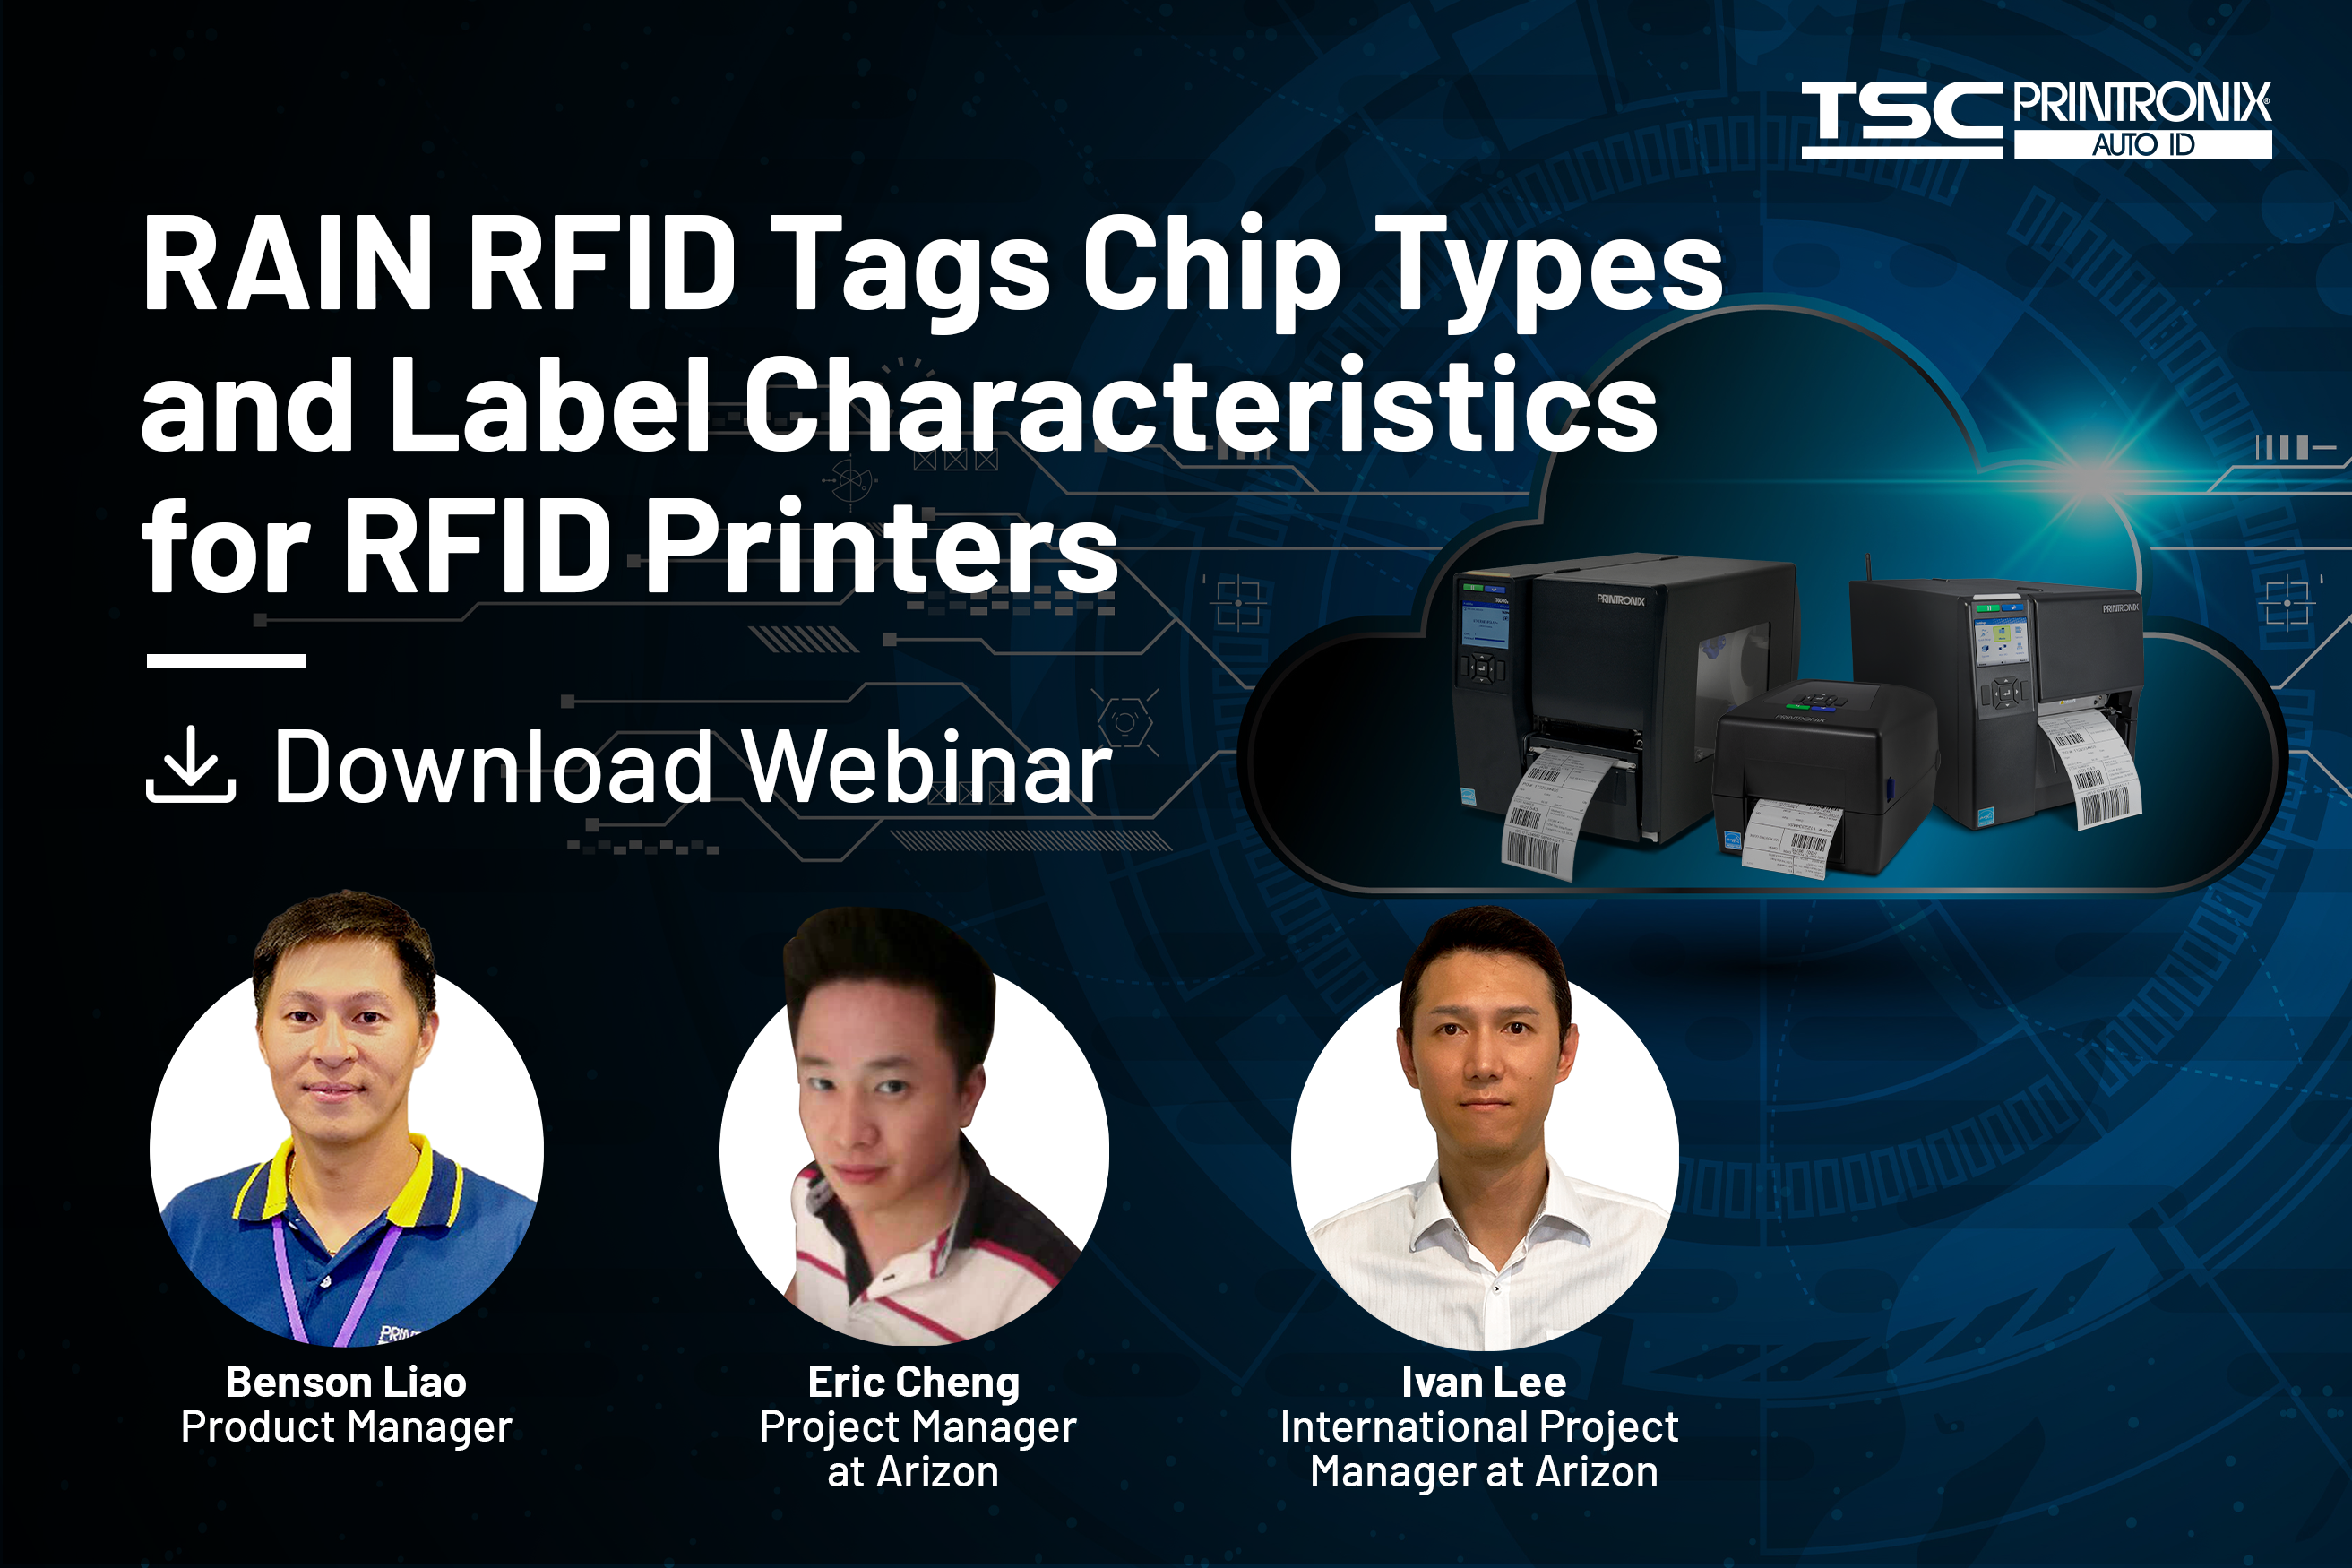 RAIN RFID Tags Chip Types and Label Characteristics for RFID Printers